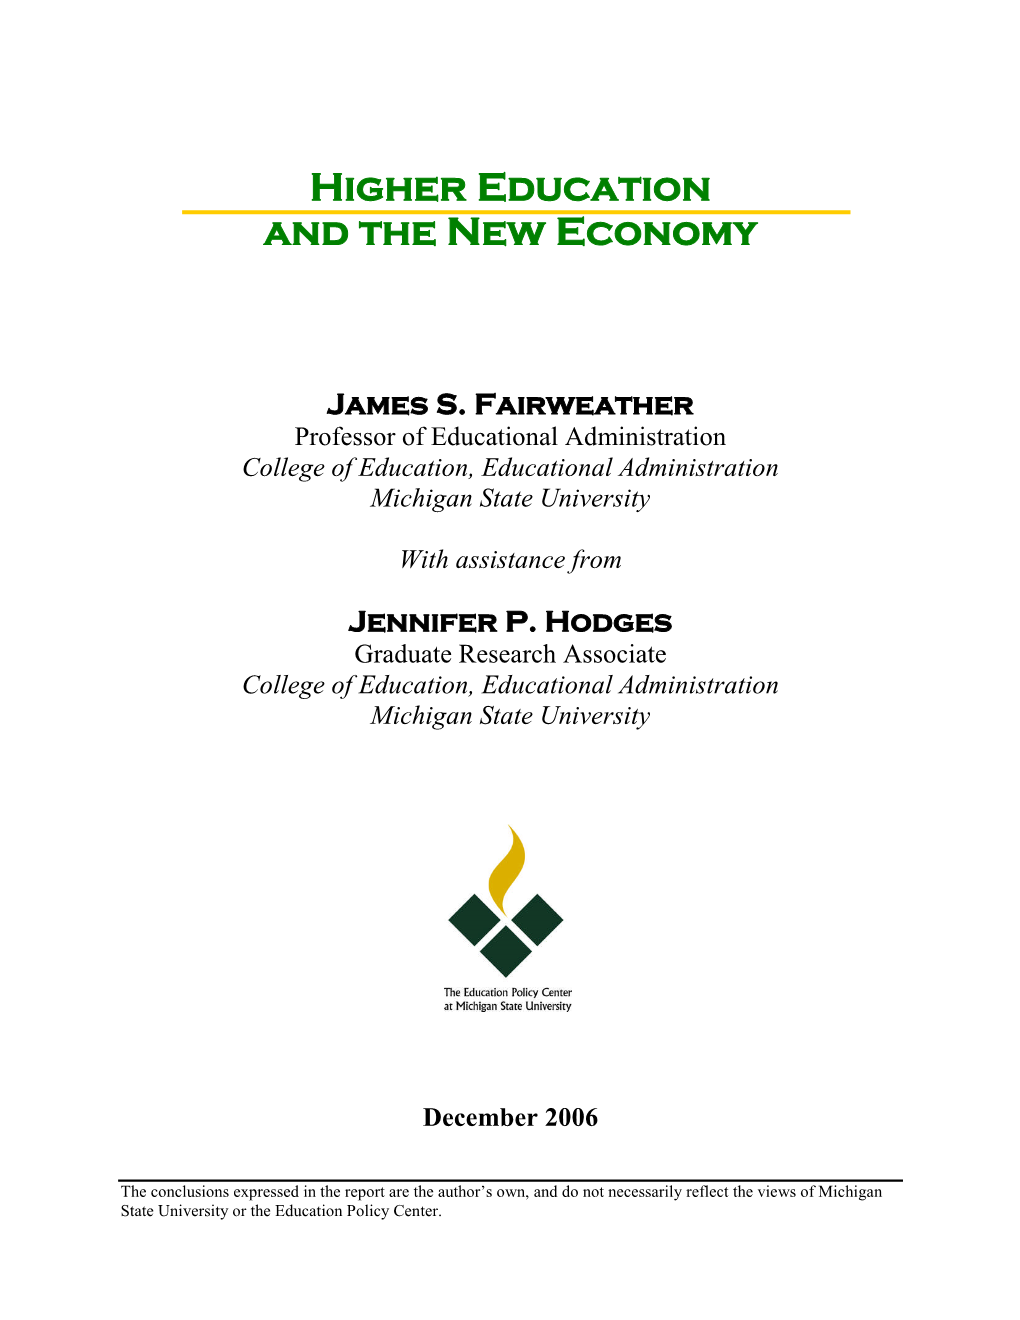 Higher Education and the New Economy